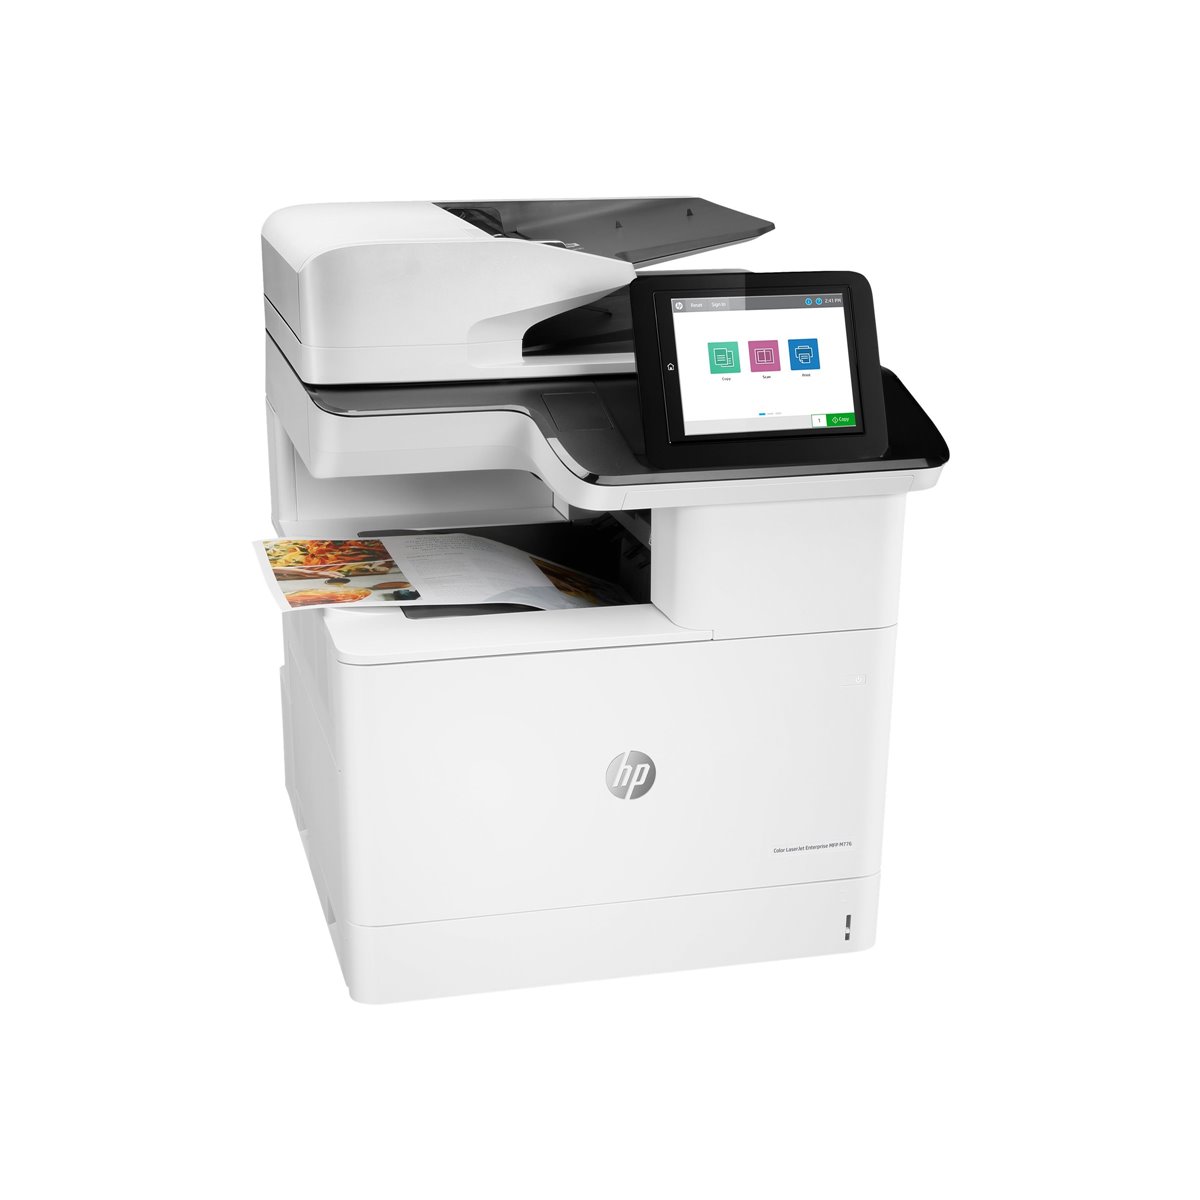 HP Color LaserJet Enterprise MFP M776dn - Print - copy - scan and optional fax - Two-sided printing Two-sided scanning Scan to e